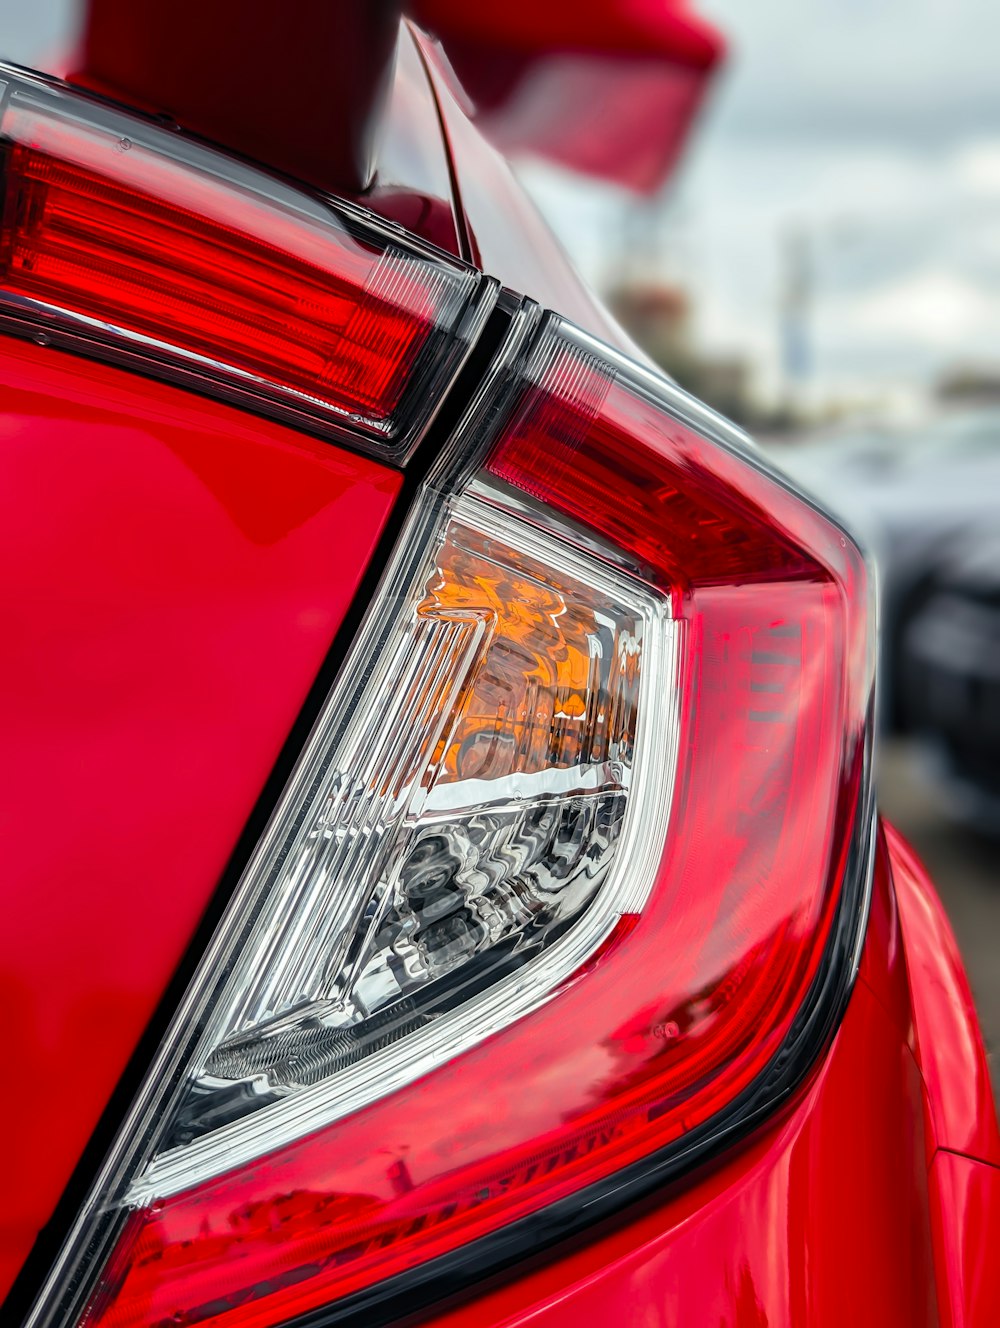 a close up of the tail light of a red car